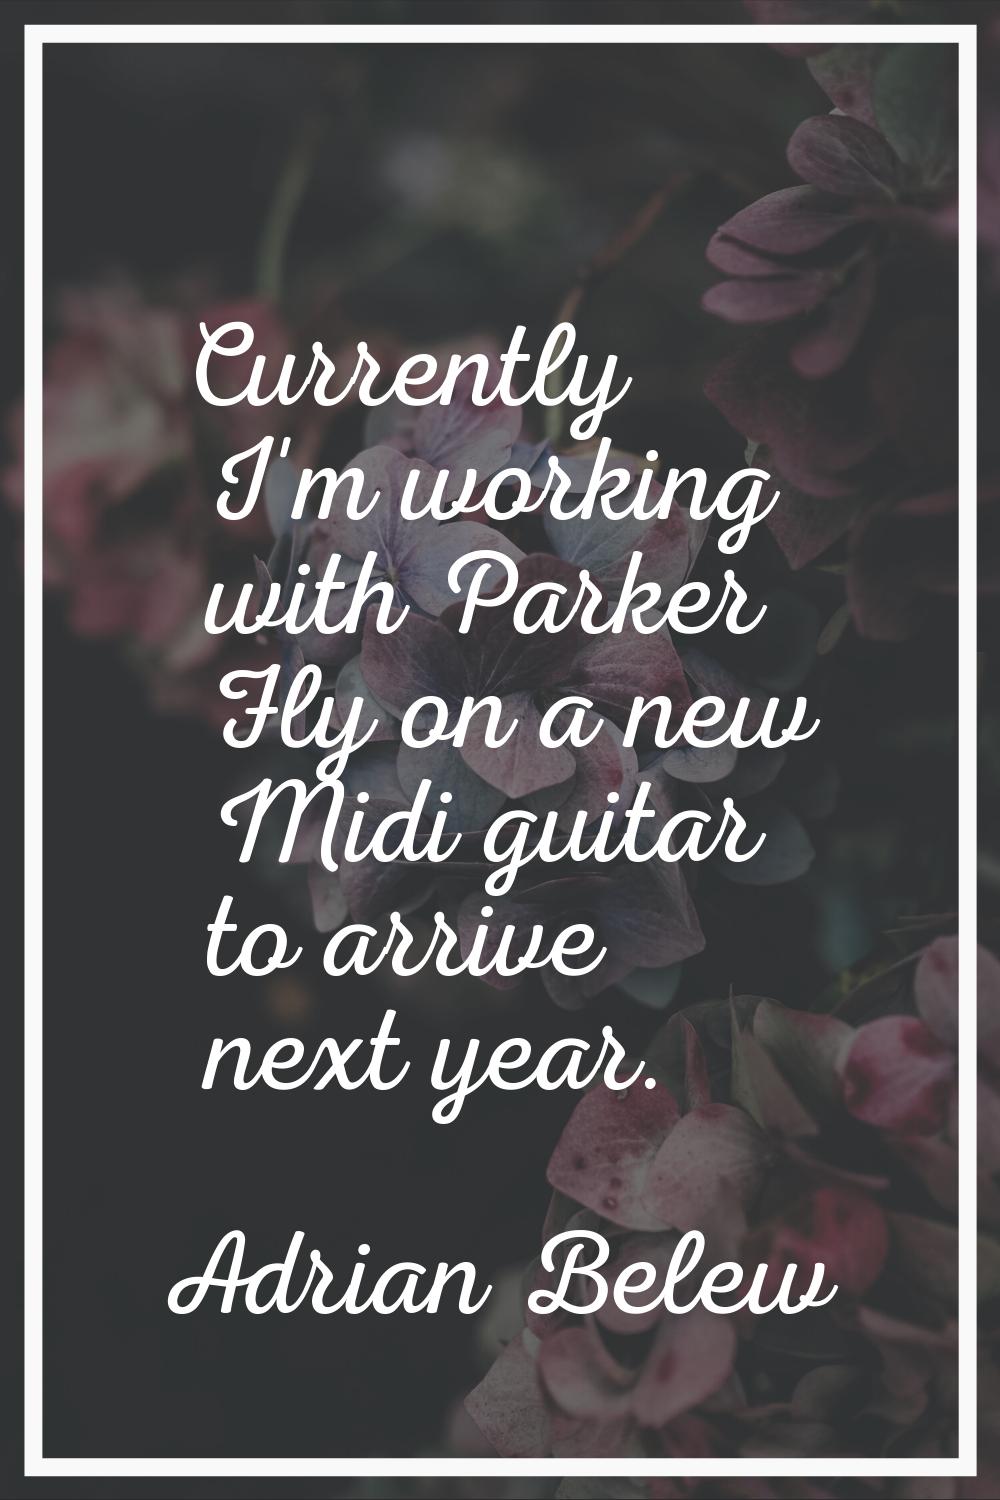 Currently I'm working with Parker Fly on a new Midi guitar to arrive next year.